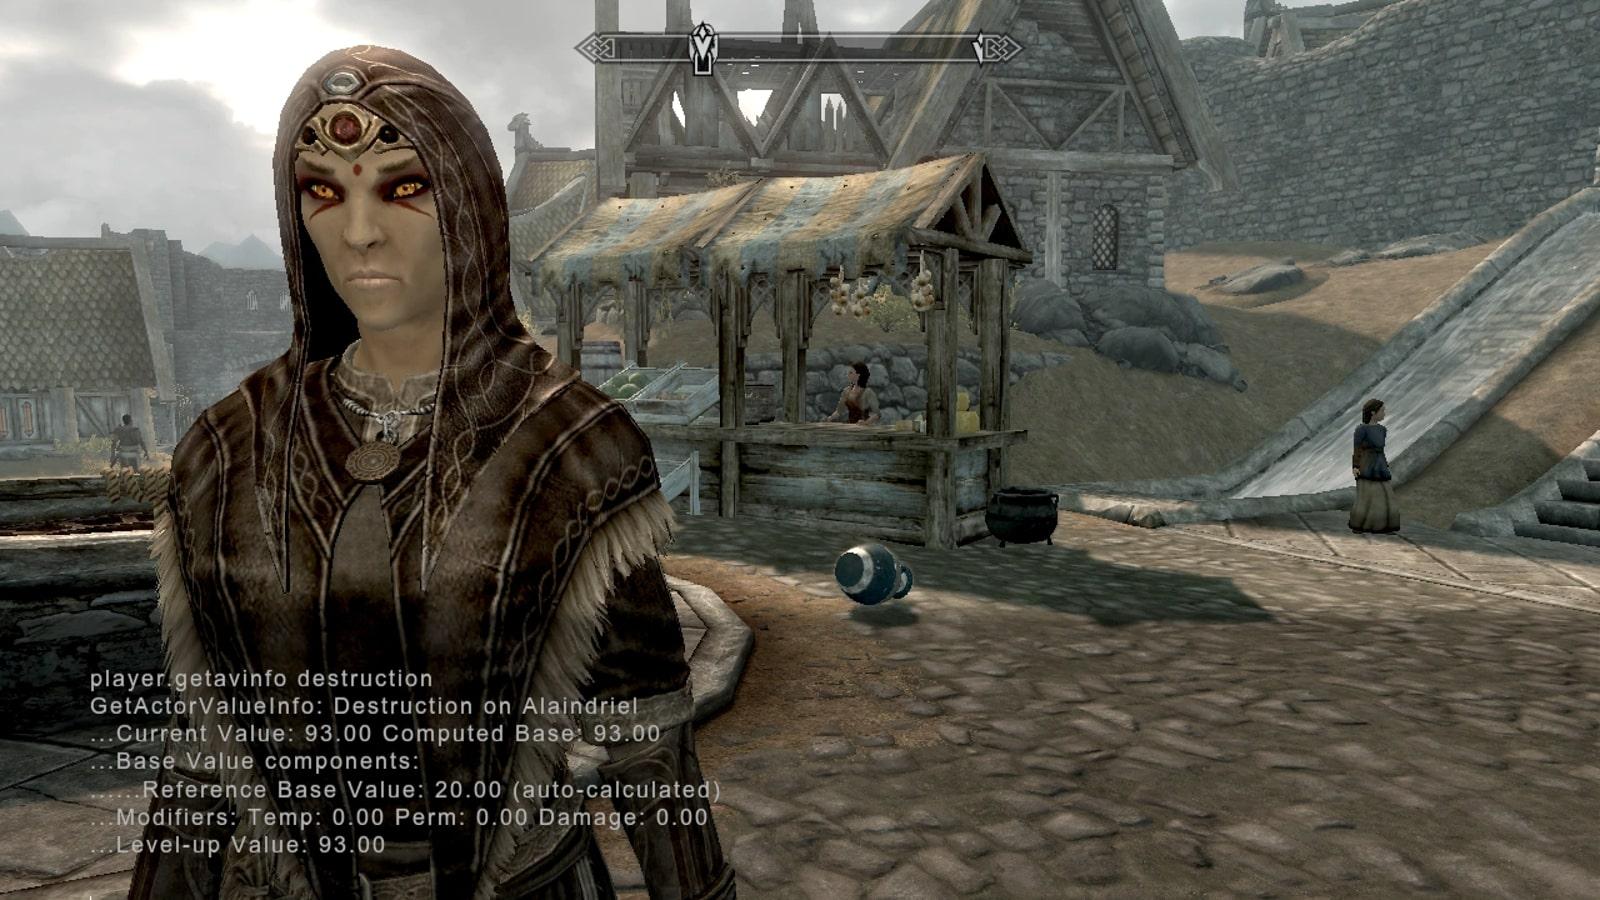 skyrim NPC of a dunmer elf being controlled by console commands